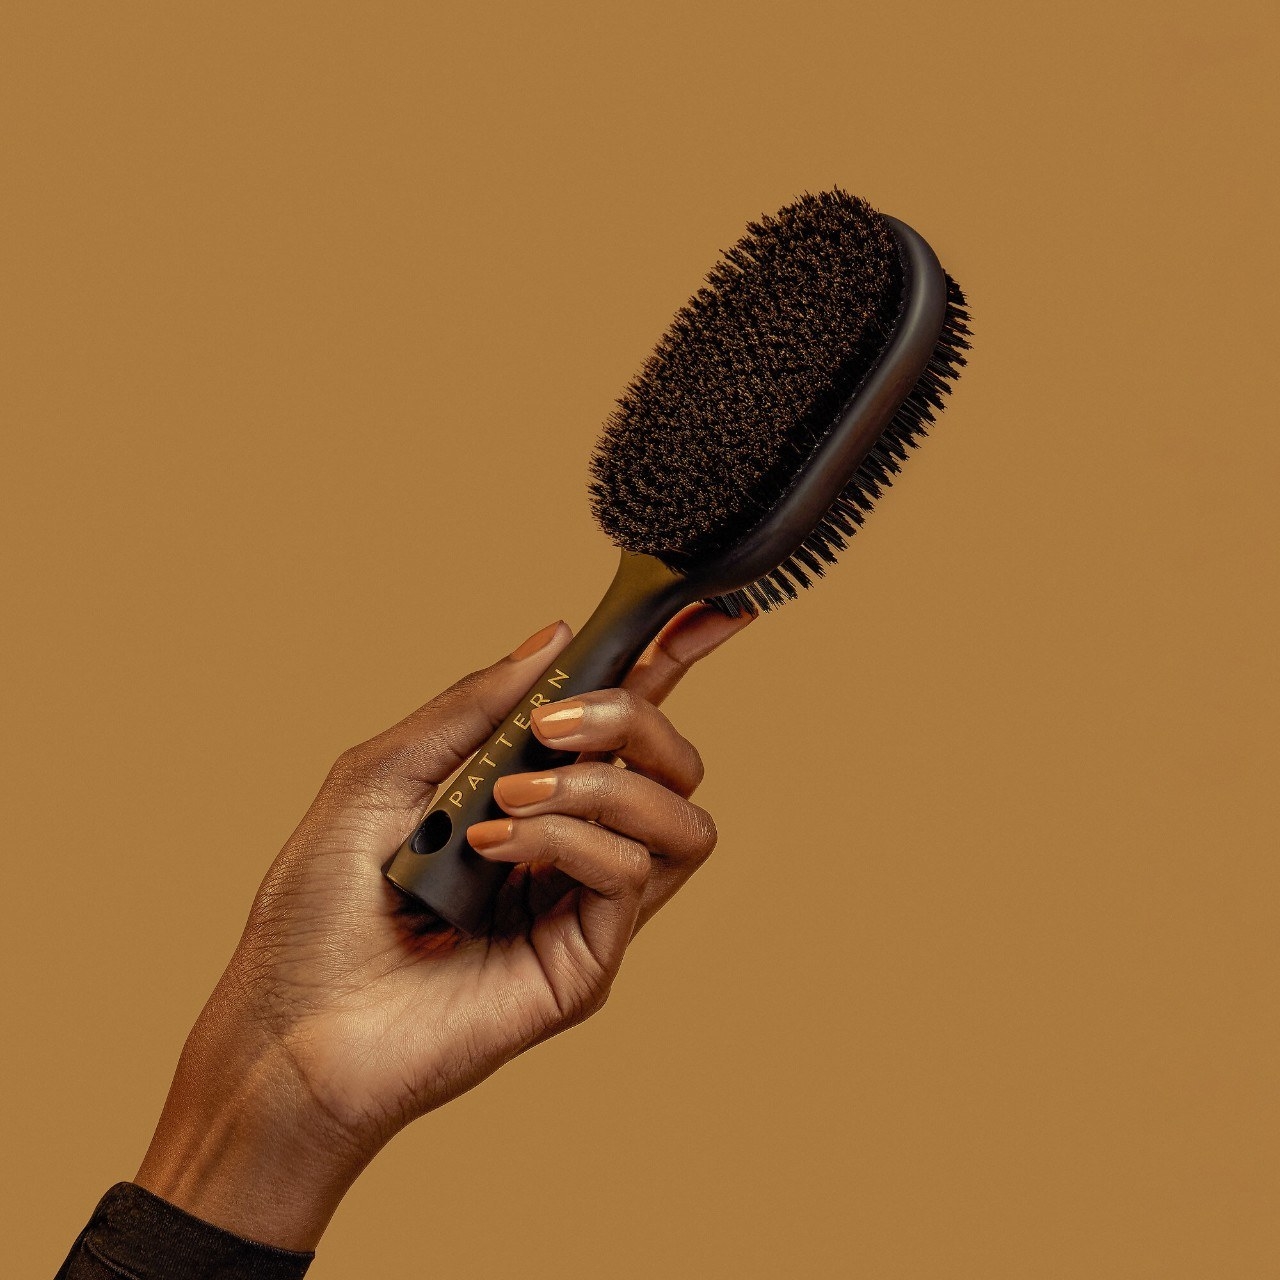 someone holding up the two-sided brush; one side has longer nylon bristles and the other shorter, denser boar hair bristles